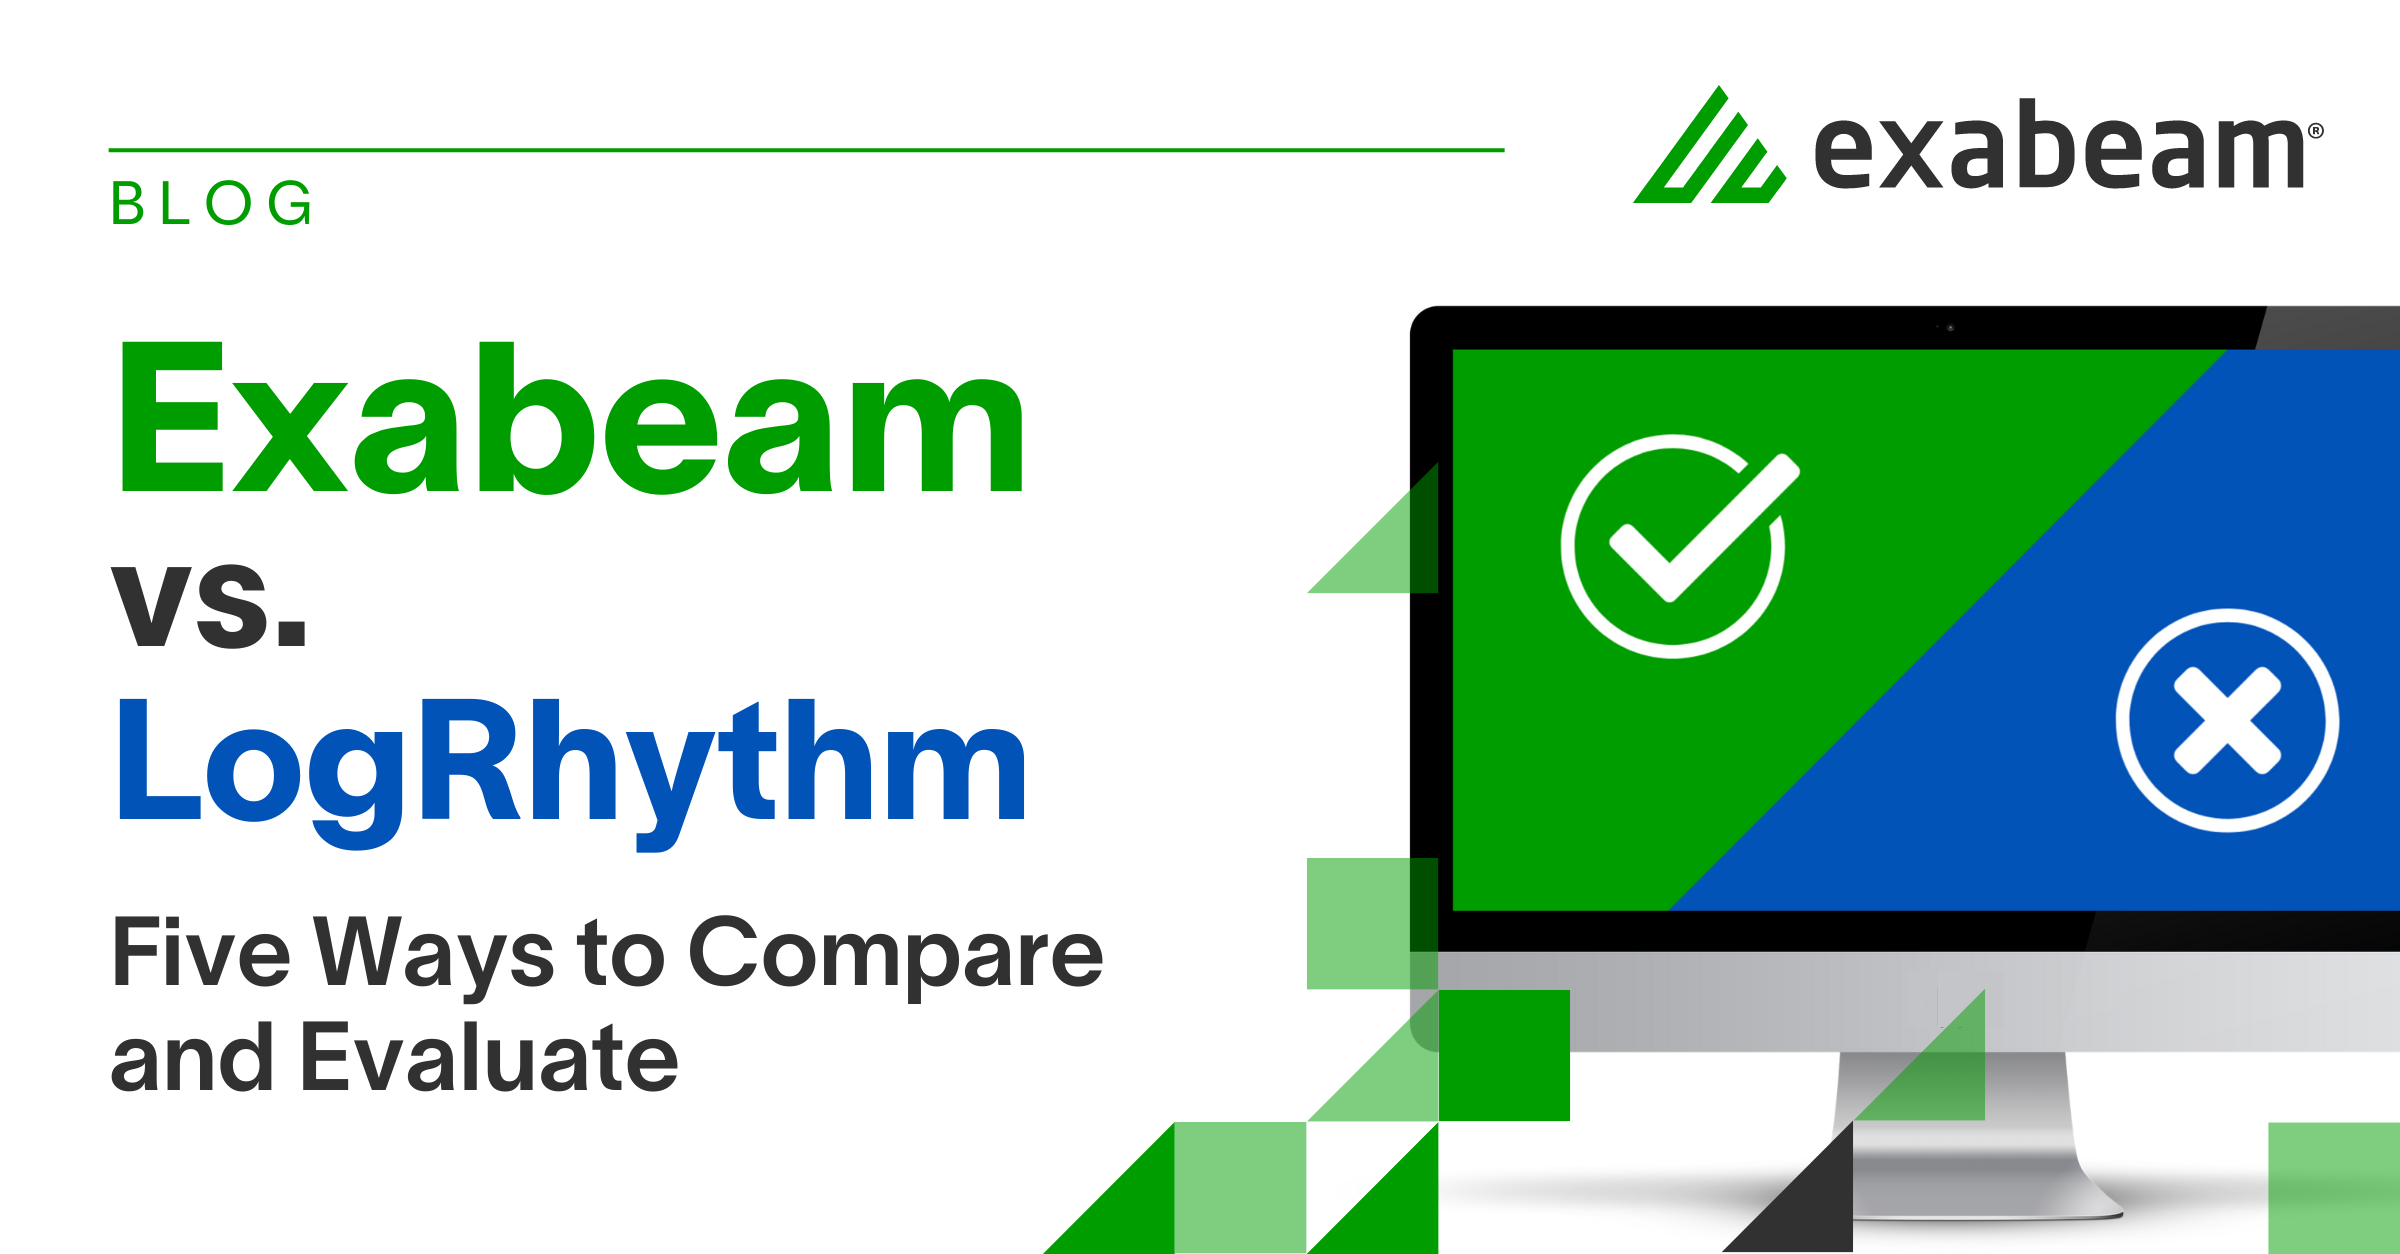 Exabeam vs. LogRhythm: Five Ways to Compare and Evaluate